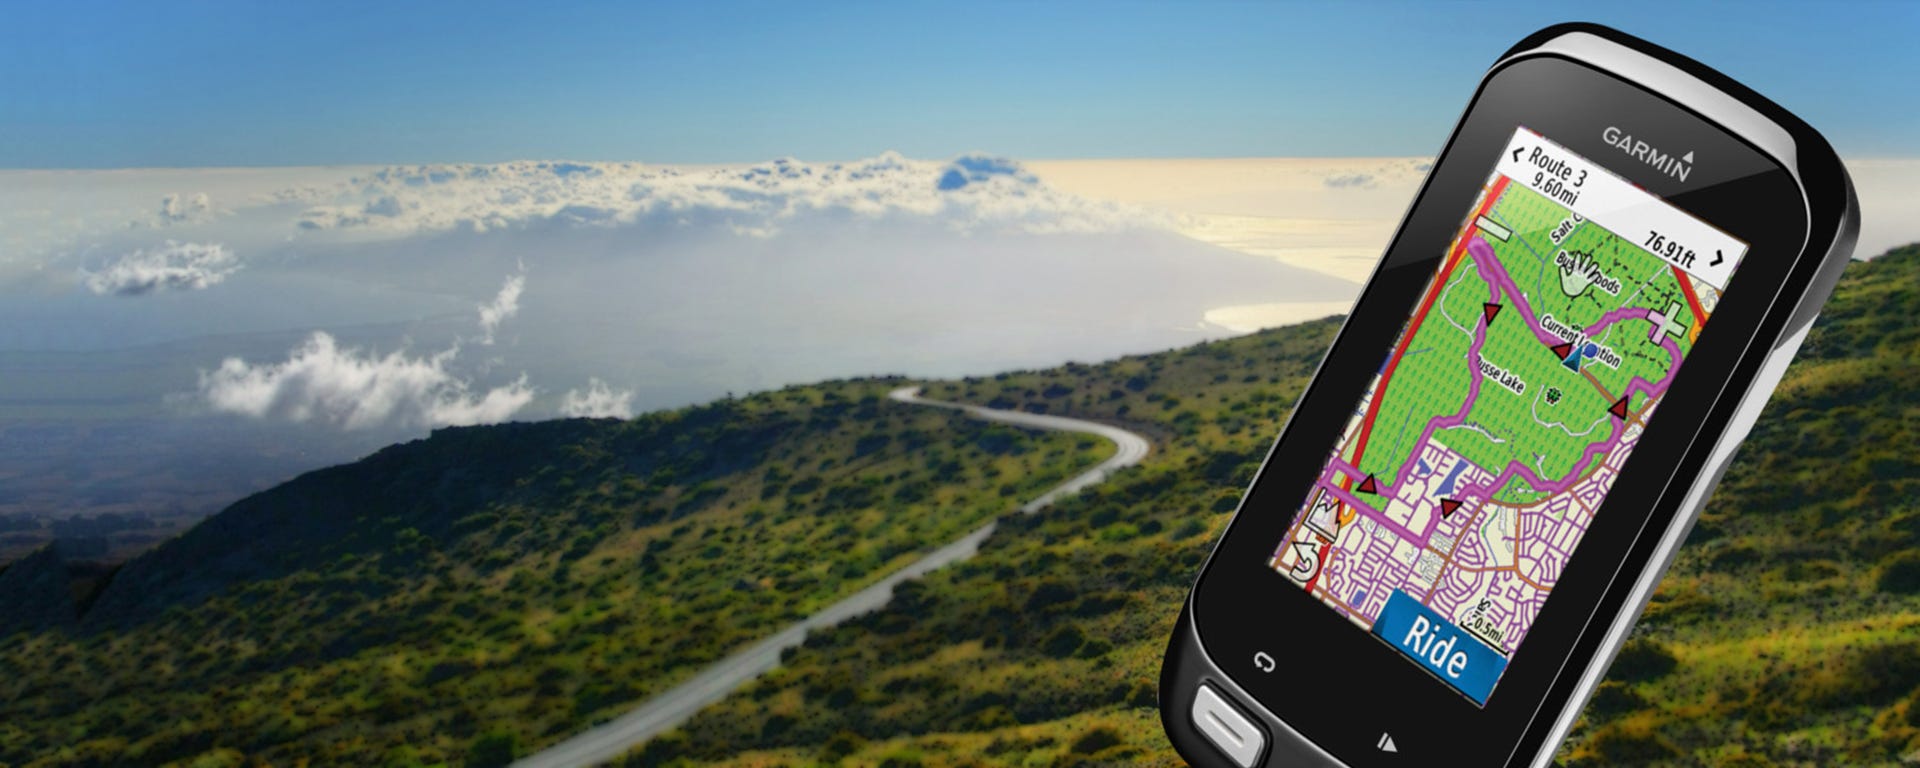 Update your Garmin Maps for free in 2019 | by Michael ...